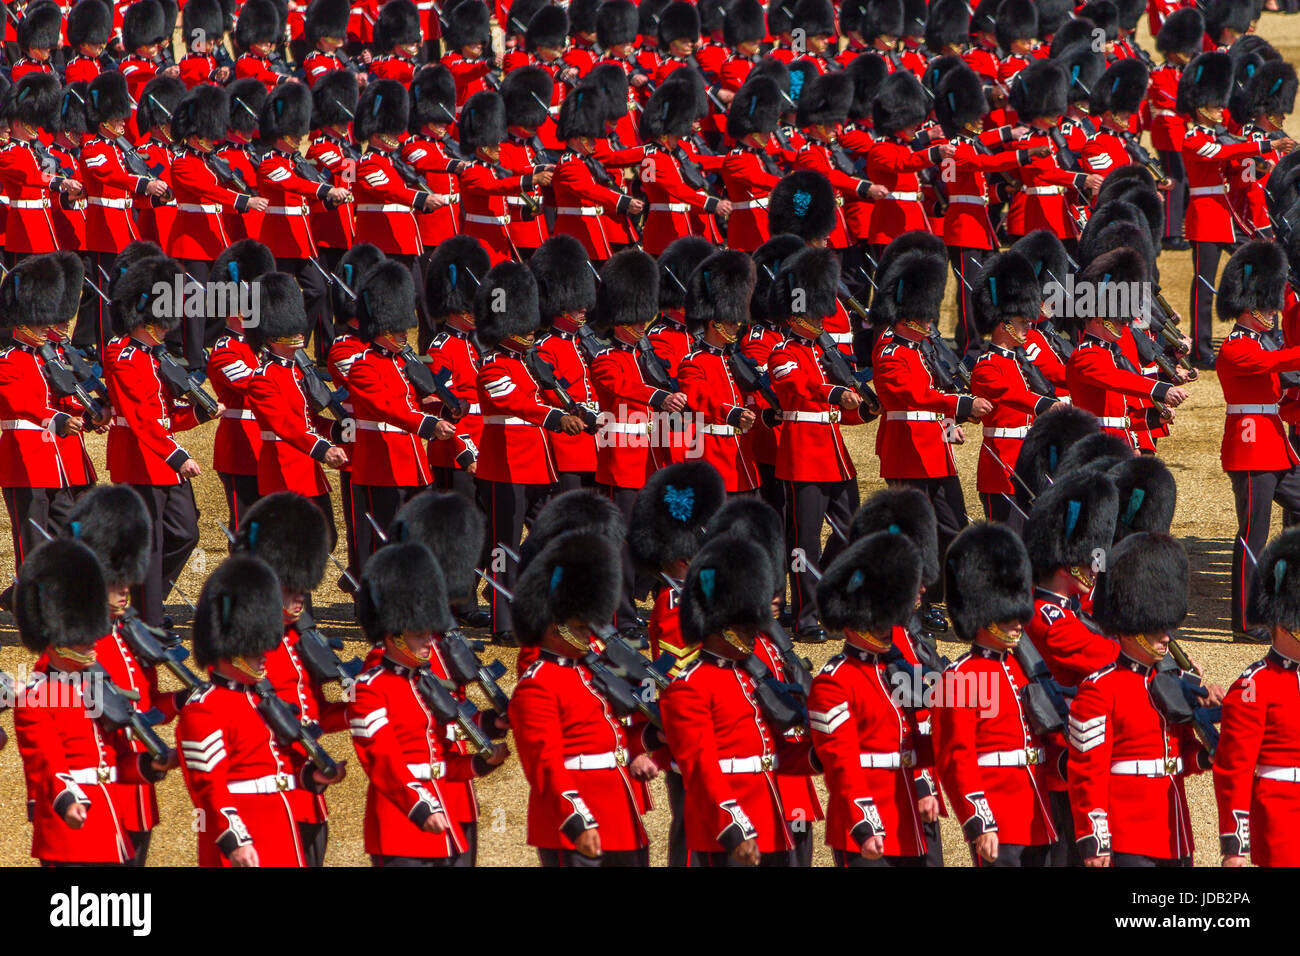 Soldiers of The Irish Guards marching at Trooping The Colour or The Queens Birthday Parade at Horse Guards Parade, London, UK, 2017 Stock Photo